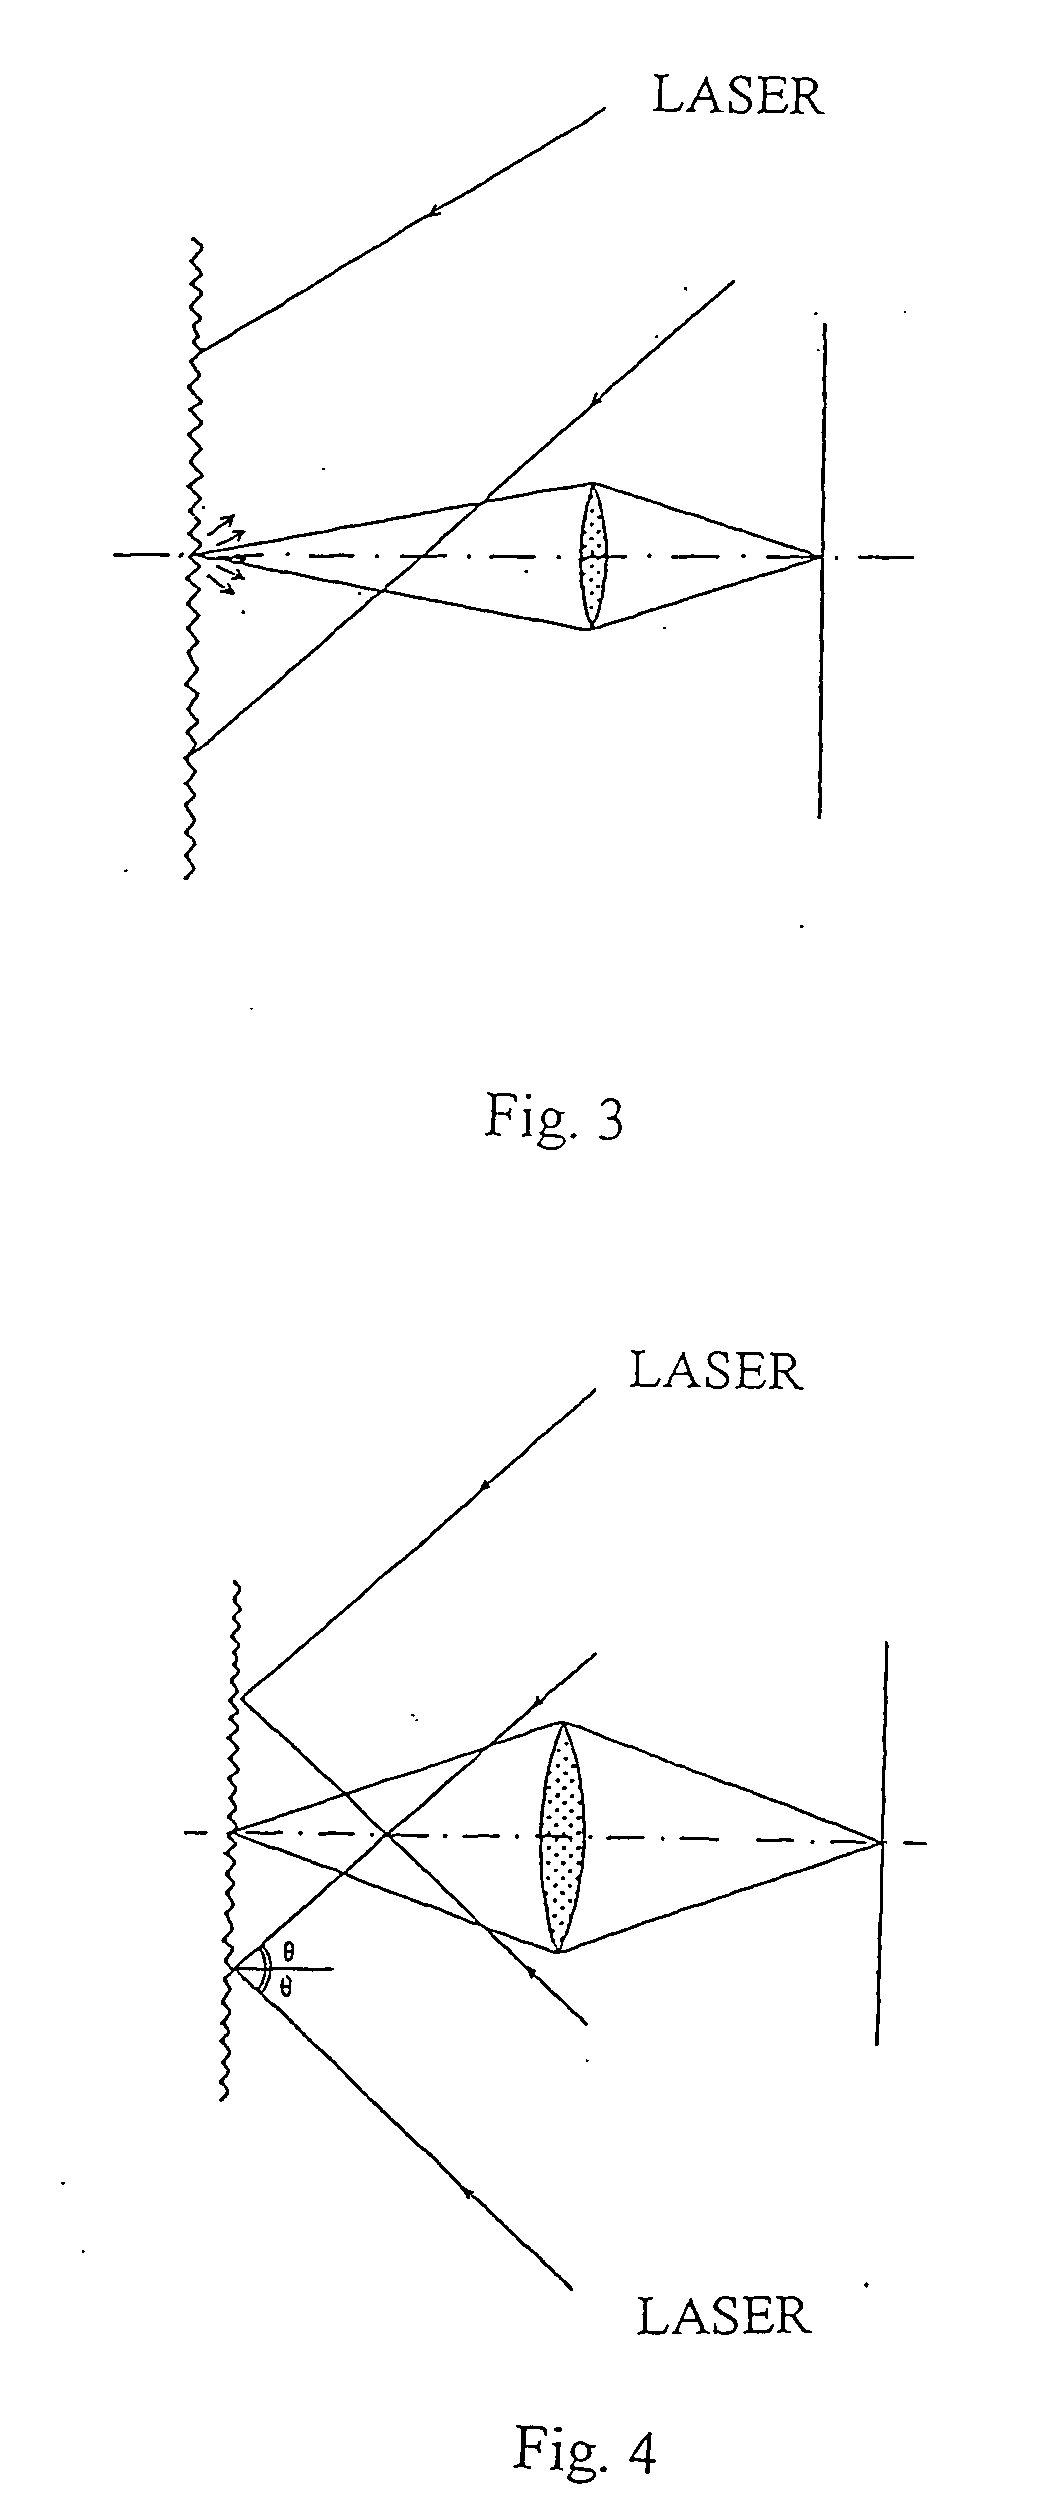 Mouse optical signal process method and device